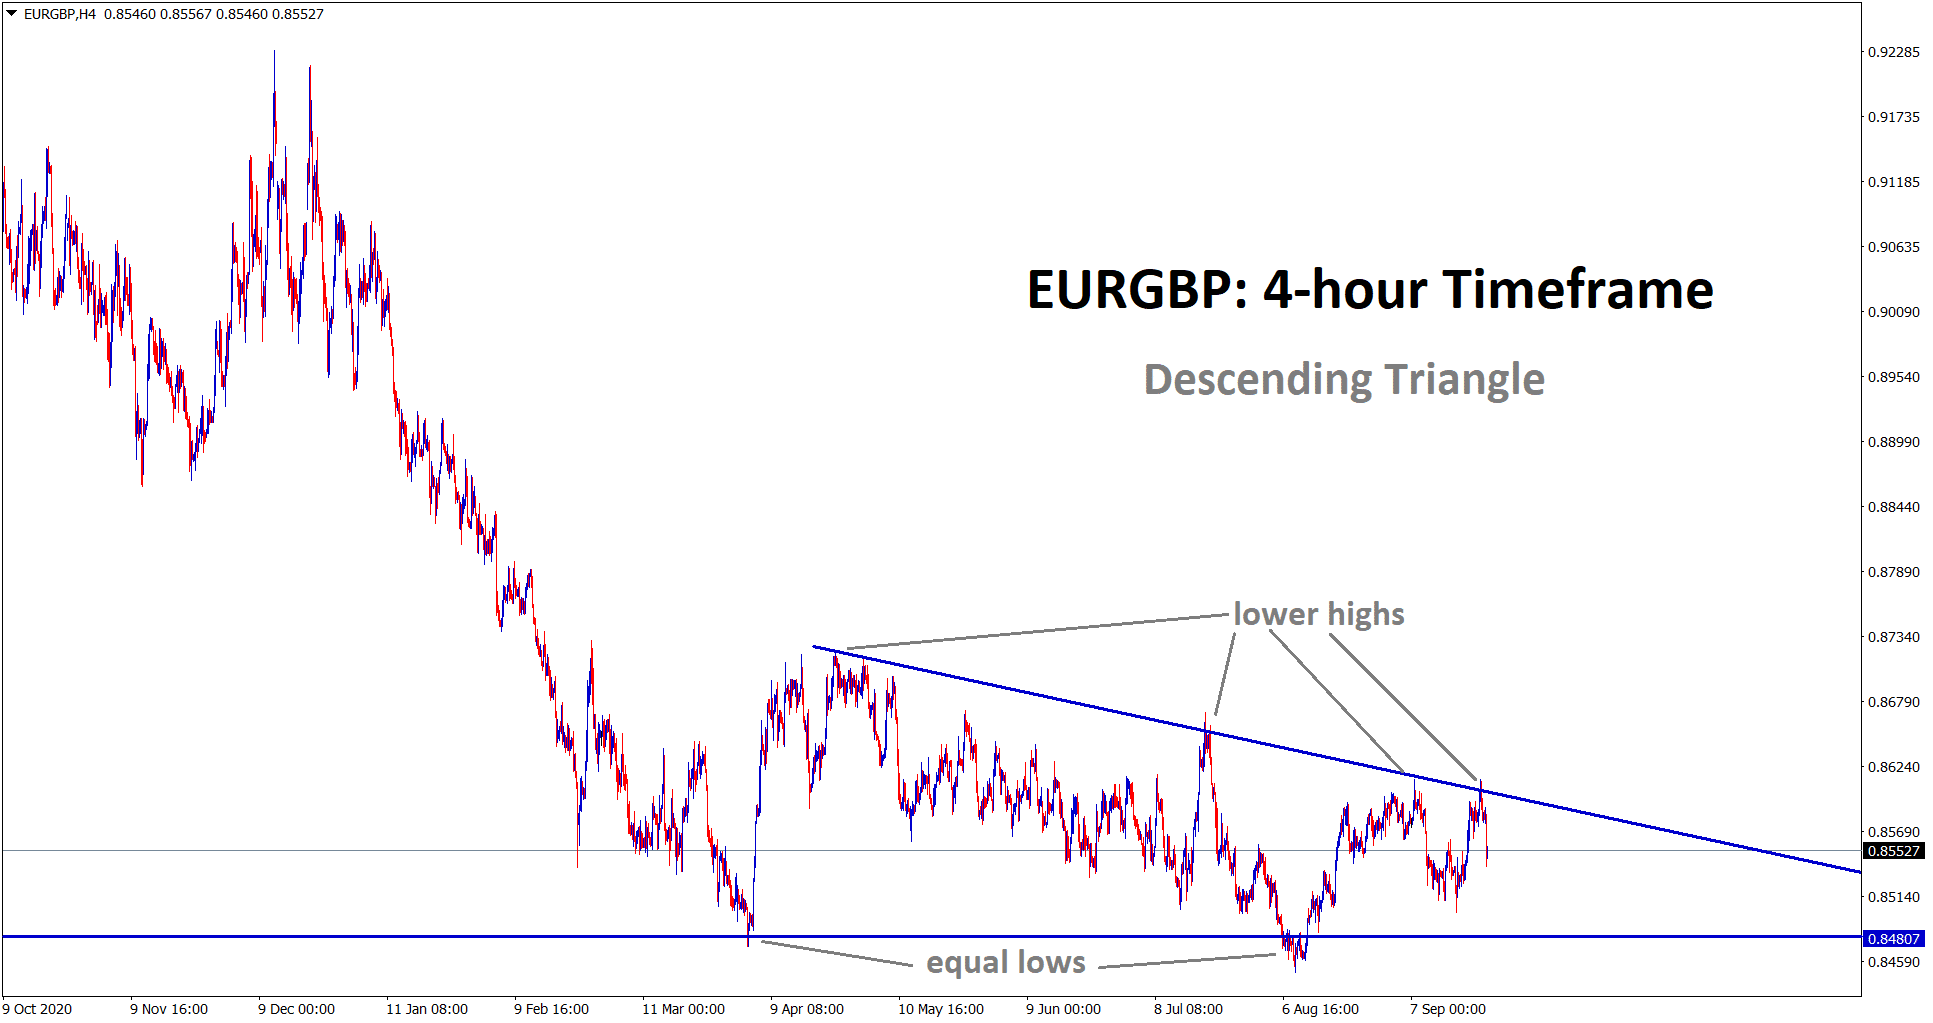 EURGBP falling from the lower high area of the descending triangle